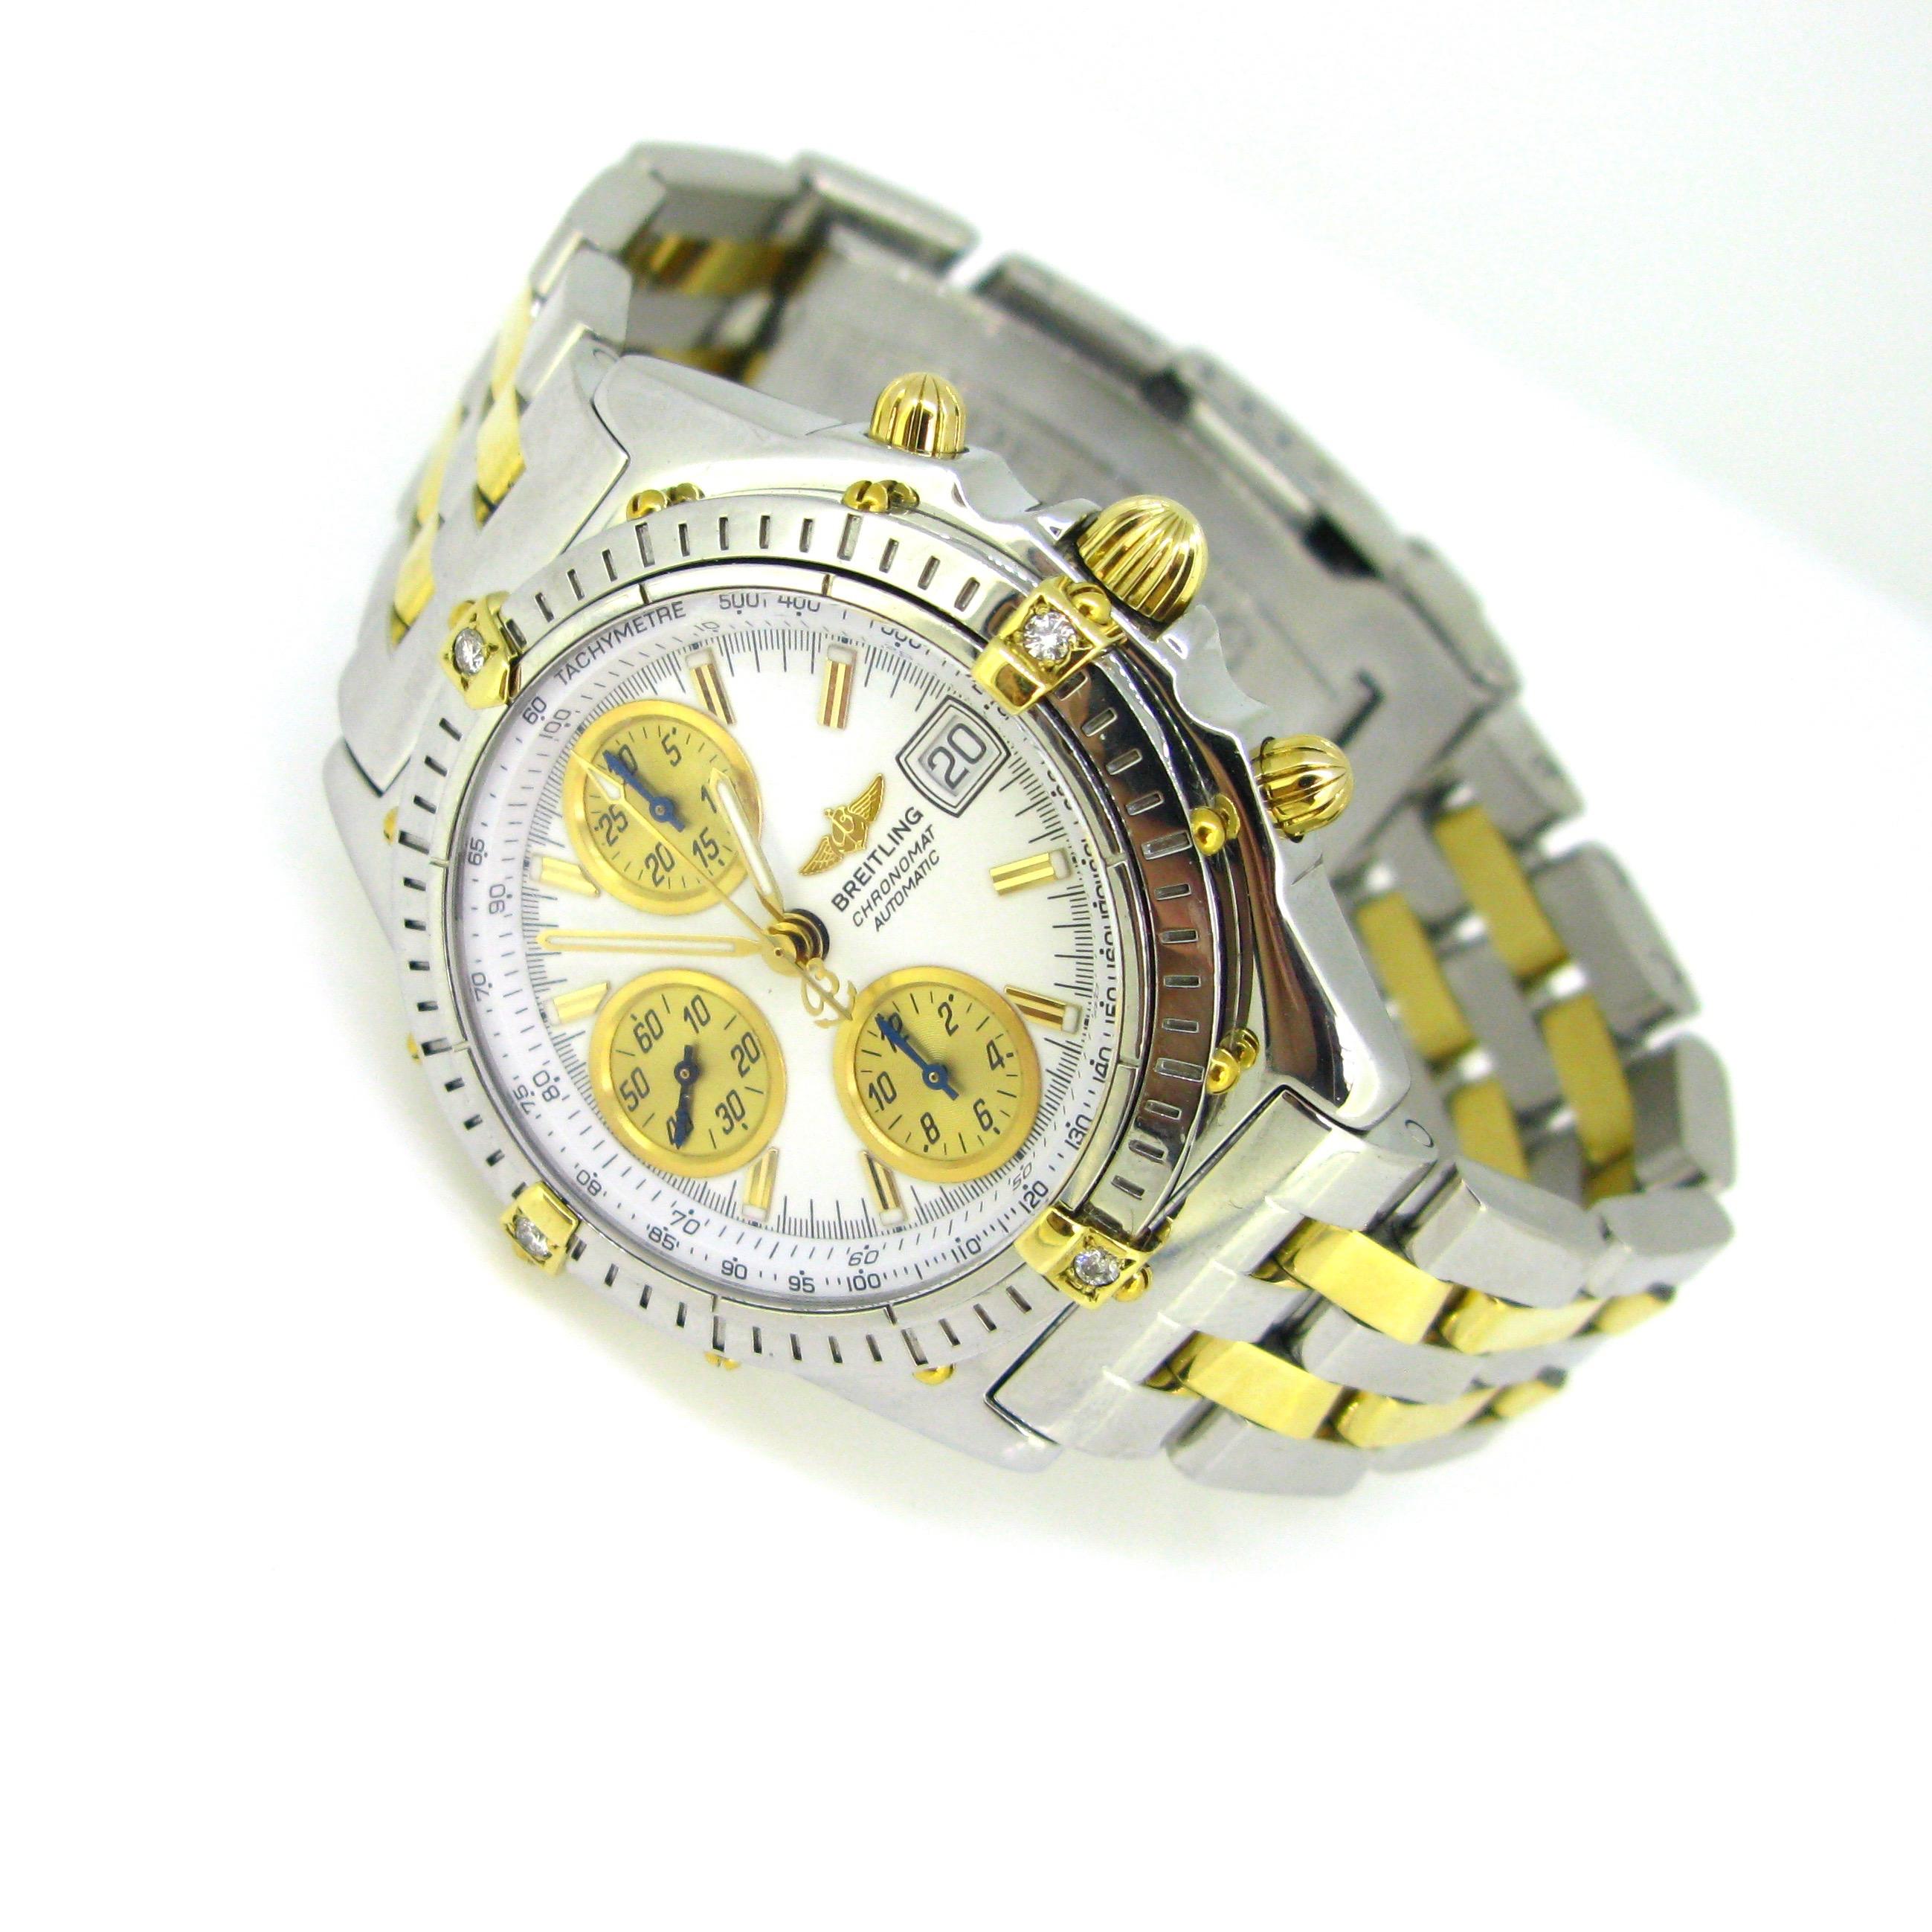 This Breitling watch is from the Chronomat Evolution collection. The bracelet is fully made in stainless steel, the case is made in steel and 18kt yellow gold; and the crowns are also made in 18kt yellow gold. The bezel around moves and is set with